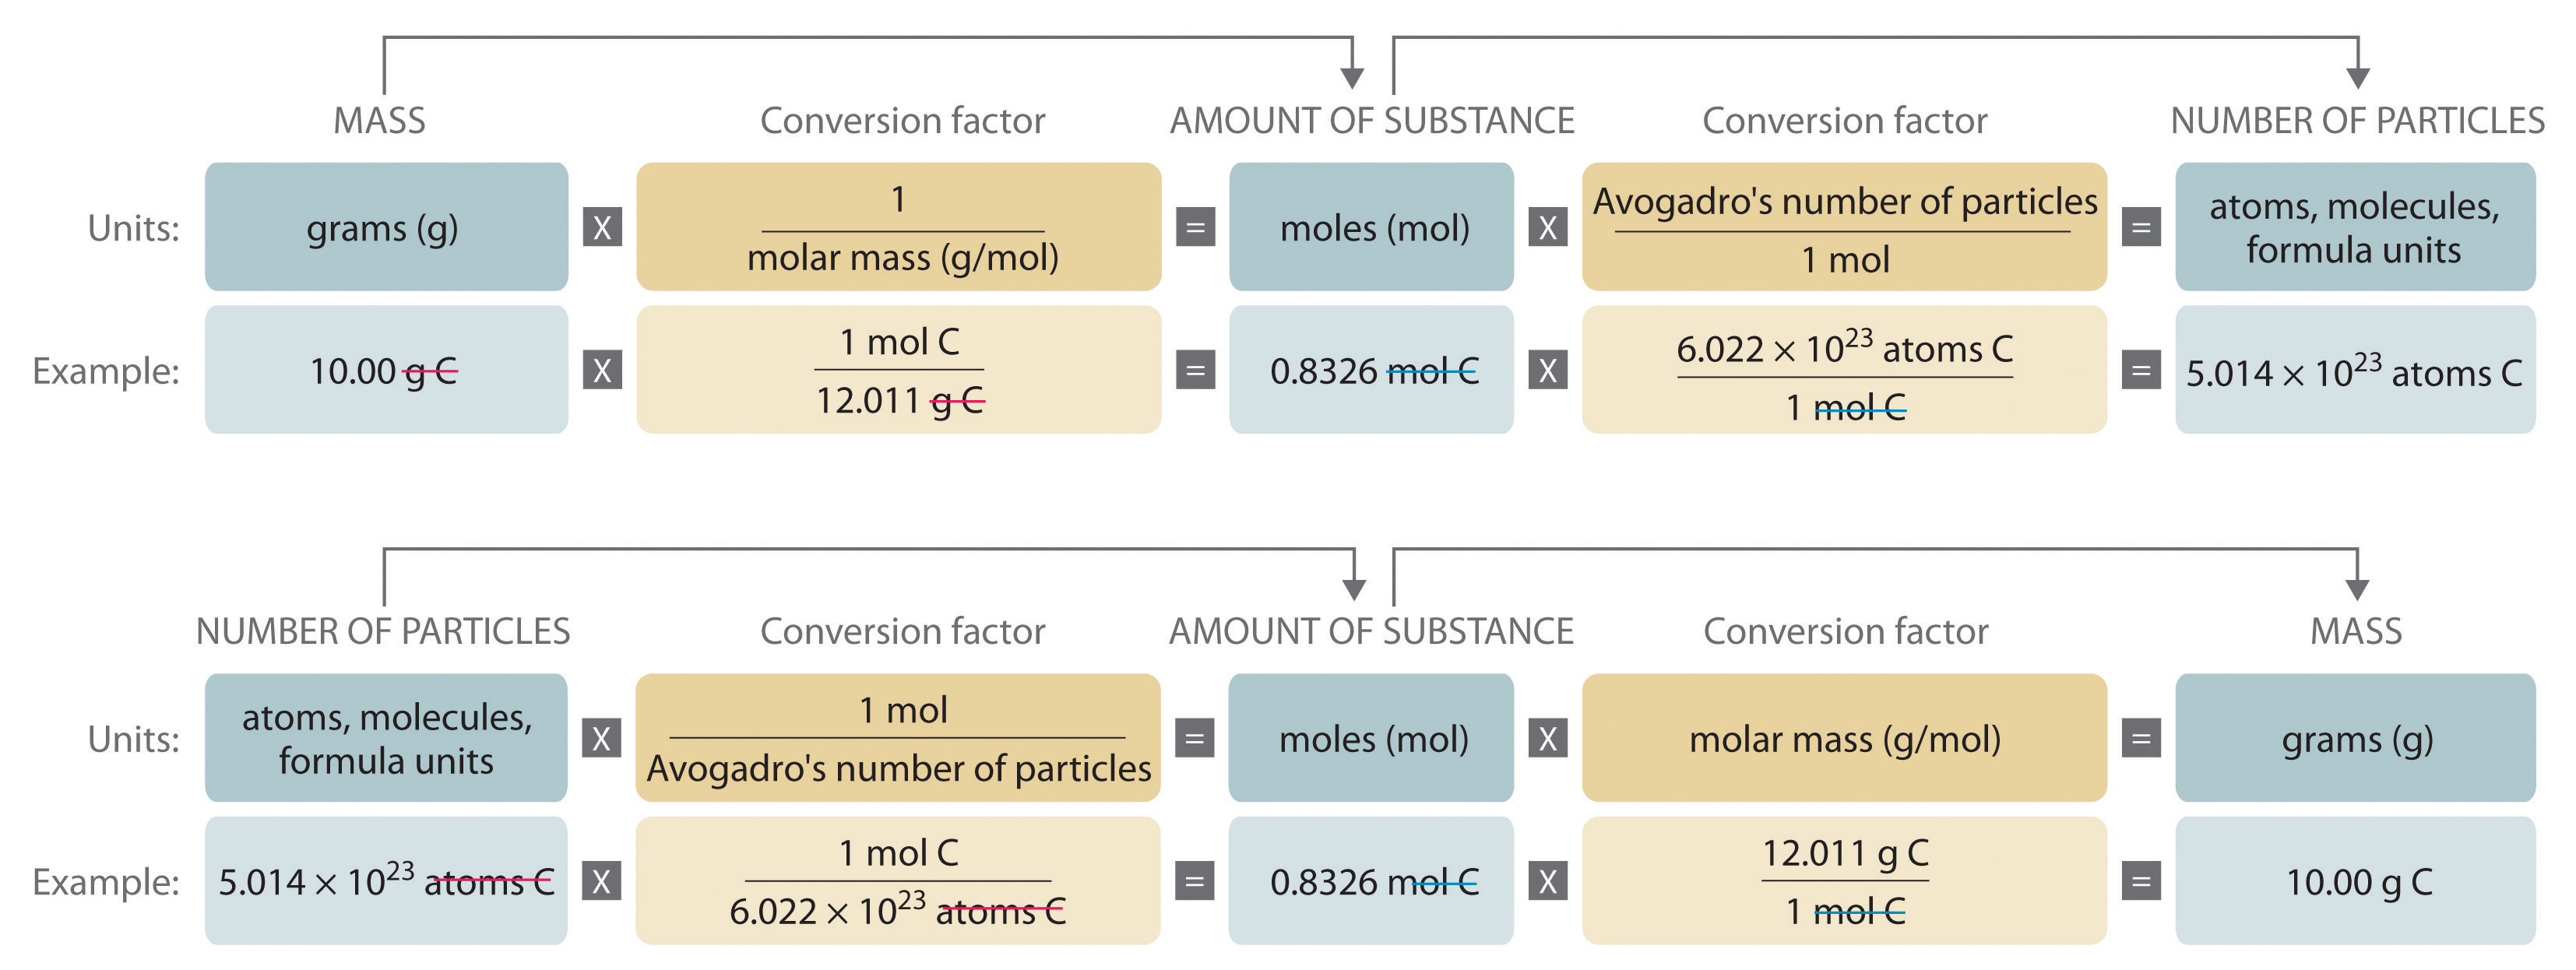 Flowchart of conversions between mass, amount of substance, and number of particles using conversion factors of molar mass and Avogadro's number.